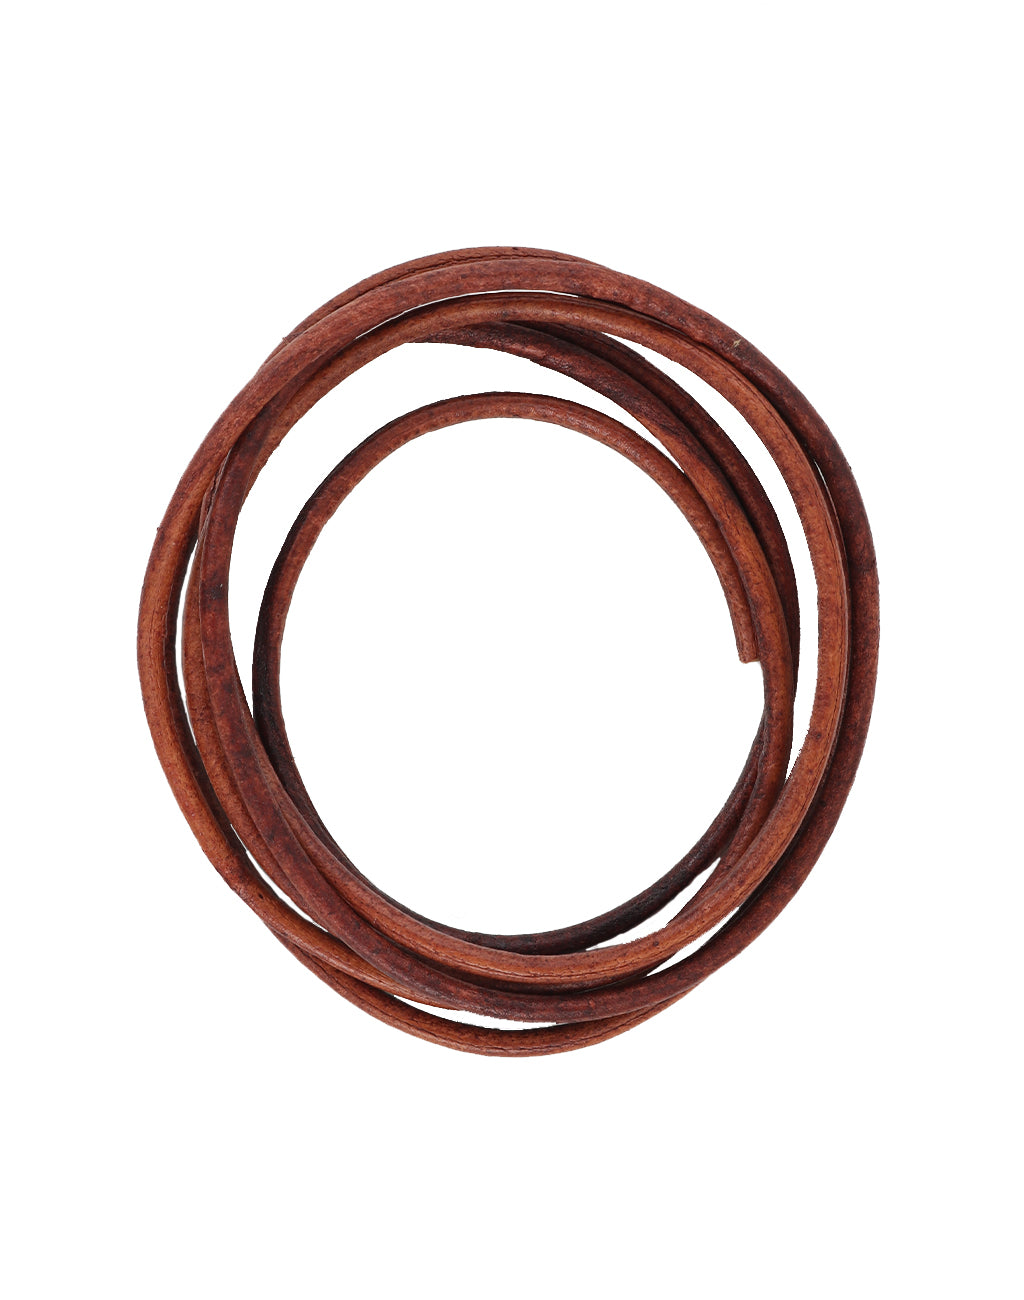 Mahogony Round Leather Cord, 2mm, (9ft)